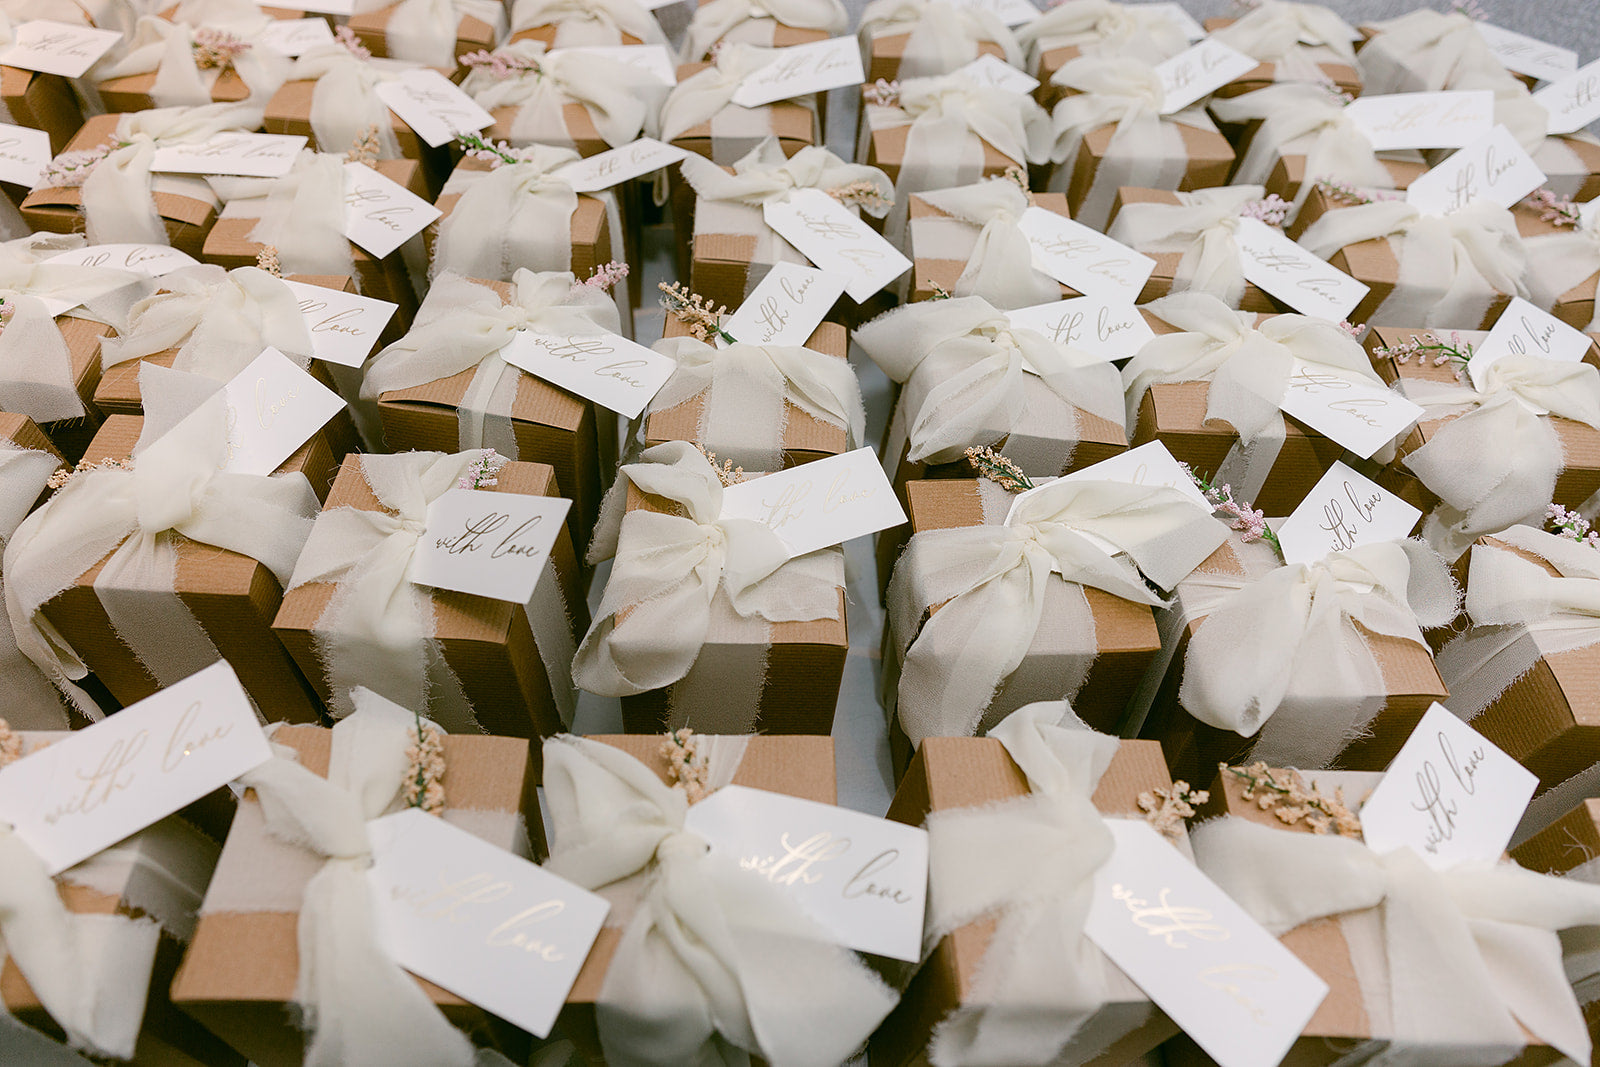 favor boxes filled with jordan almonds for the guests